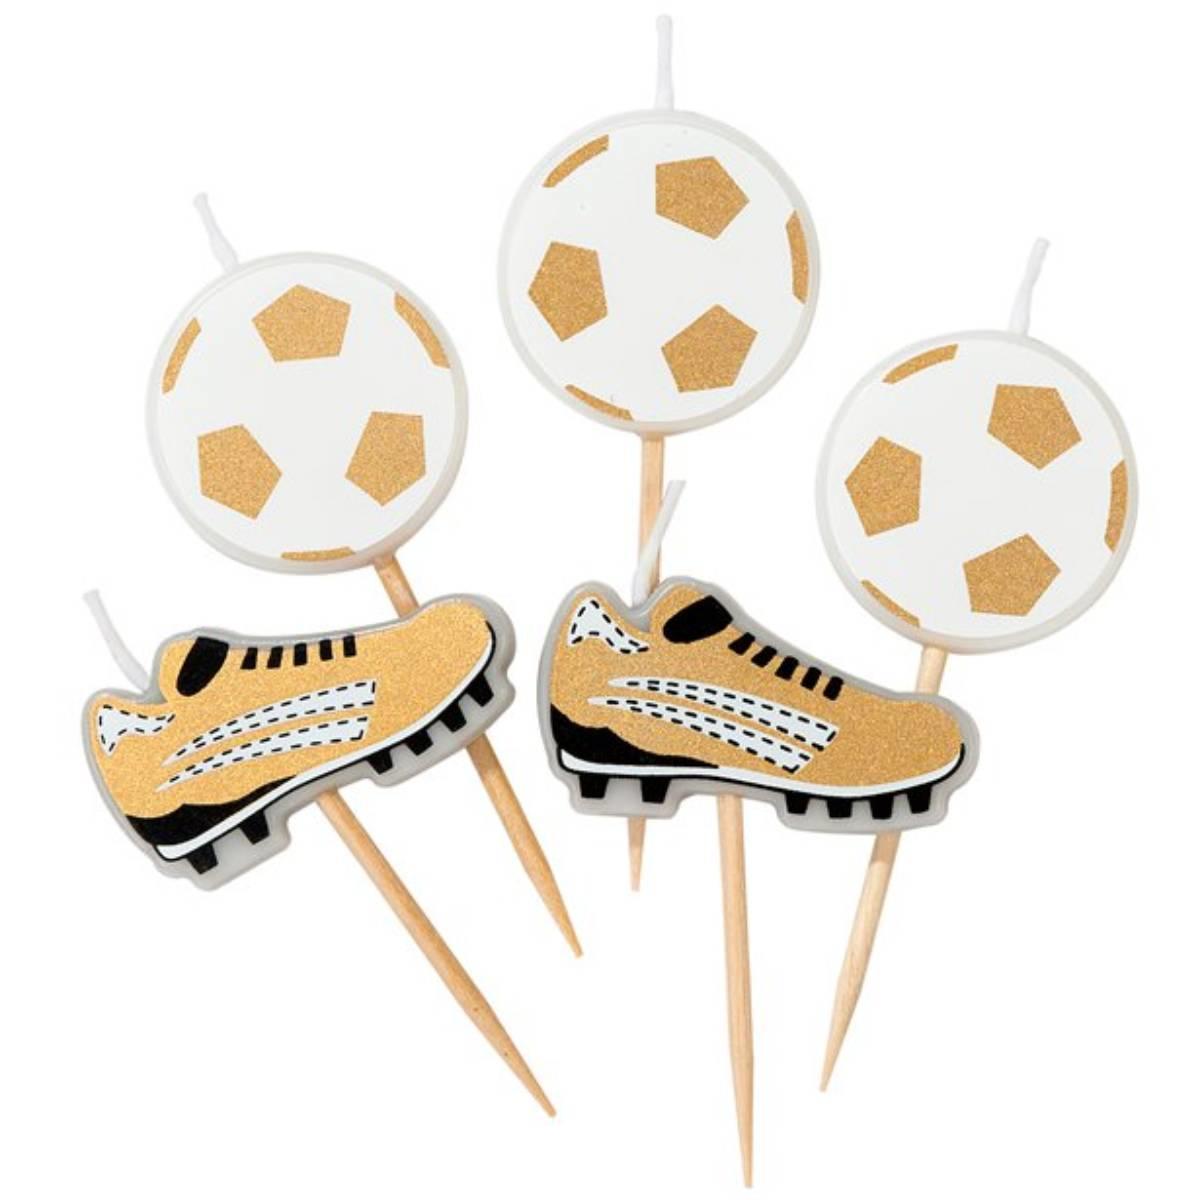 Football Champions Party Cake Candles pk5 by Talking Tables CHAMP-CANDLES available here at Karnival Costumes online party shop